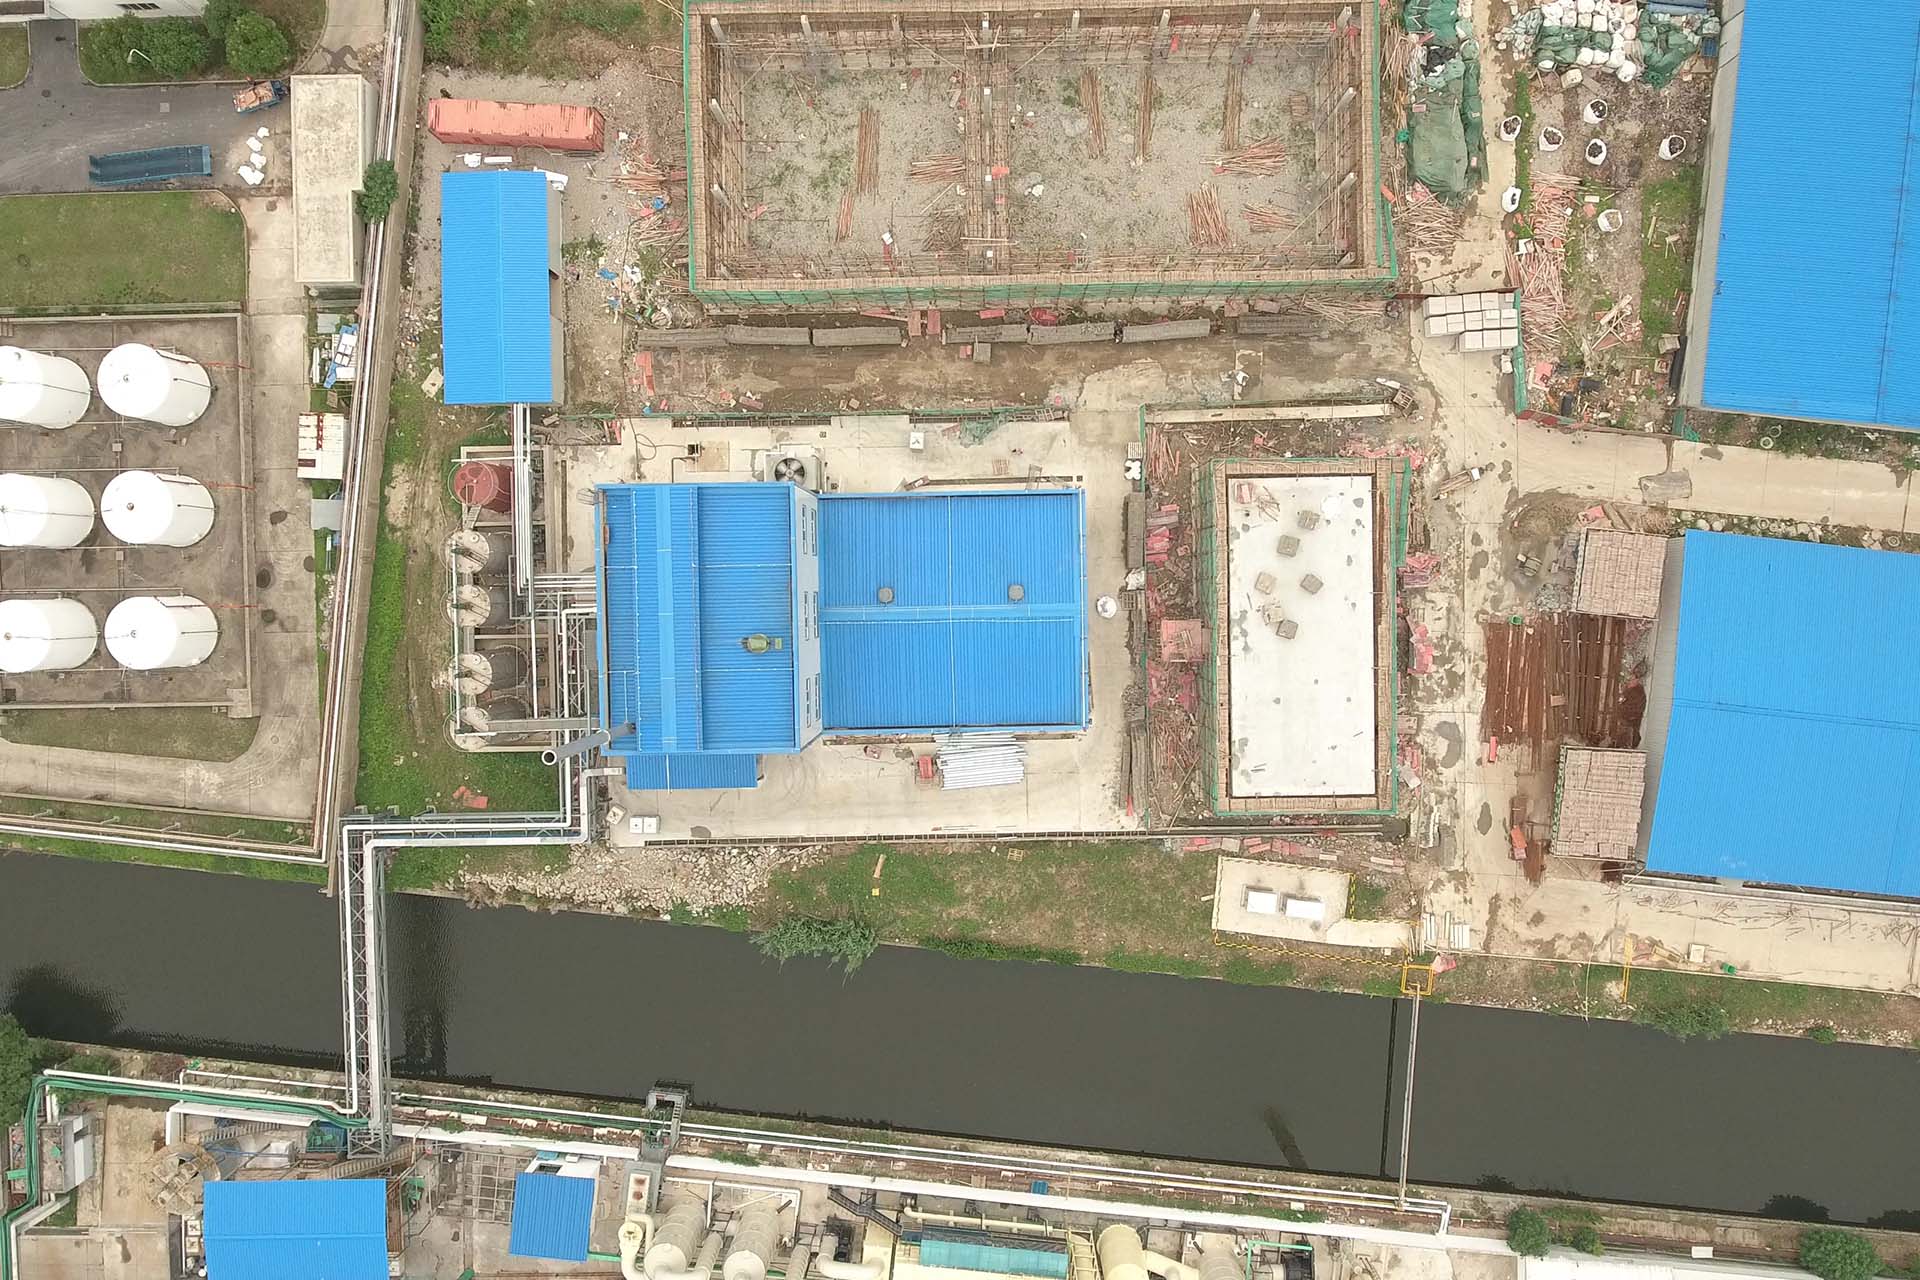 Suzhou Tianma Specialty Chemicals Co plant ecologia informatica aerial view